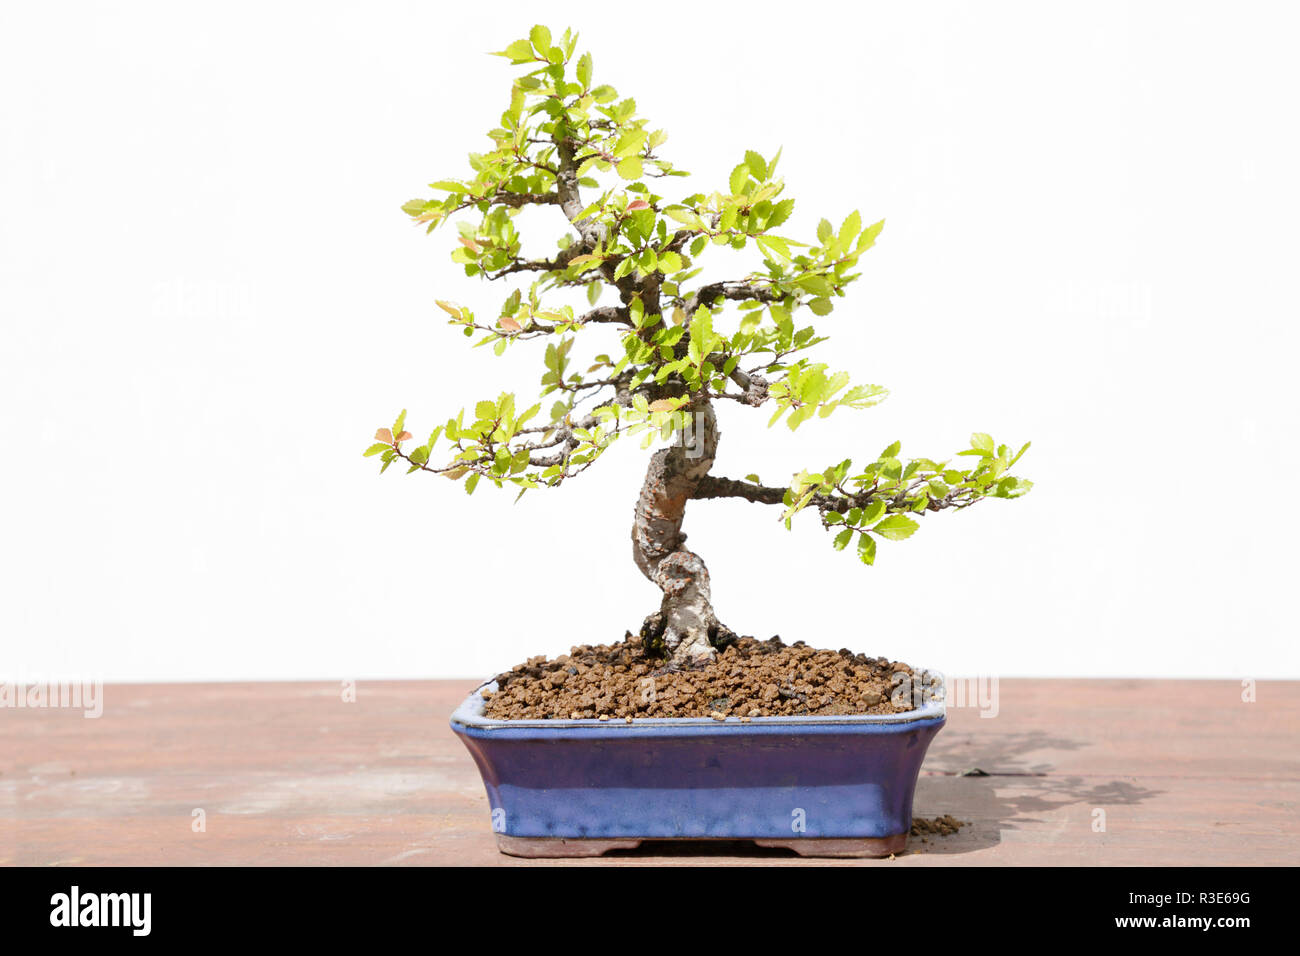 Chinese elm (Ulmus parvifolia) bonsai on a wooden table and white background Stock Photo